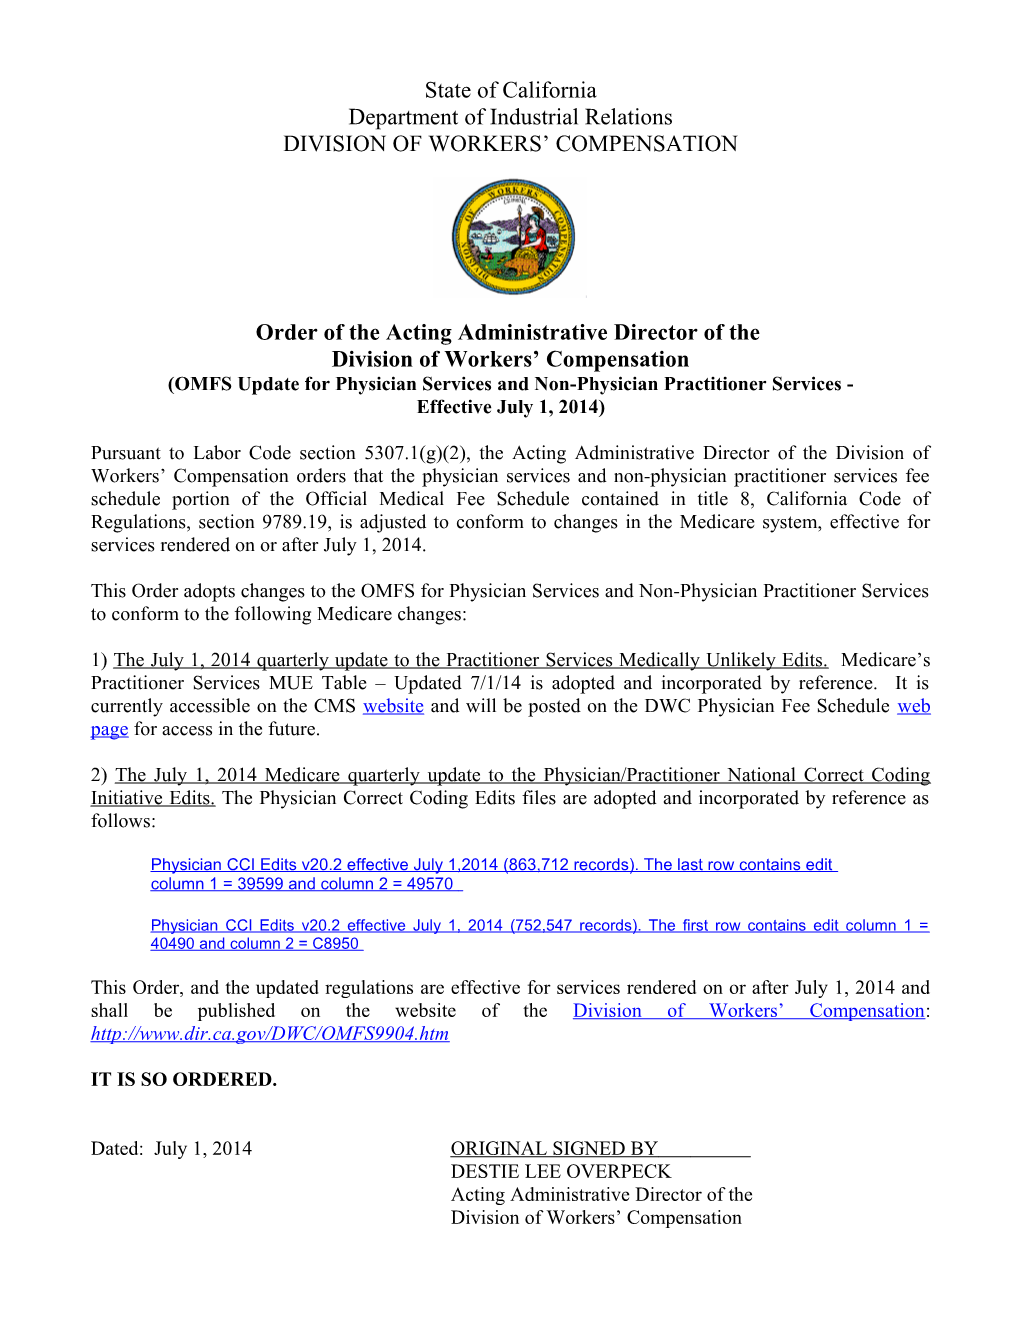 Order of the Acting Administrative Director of The s1